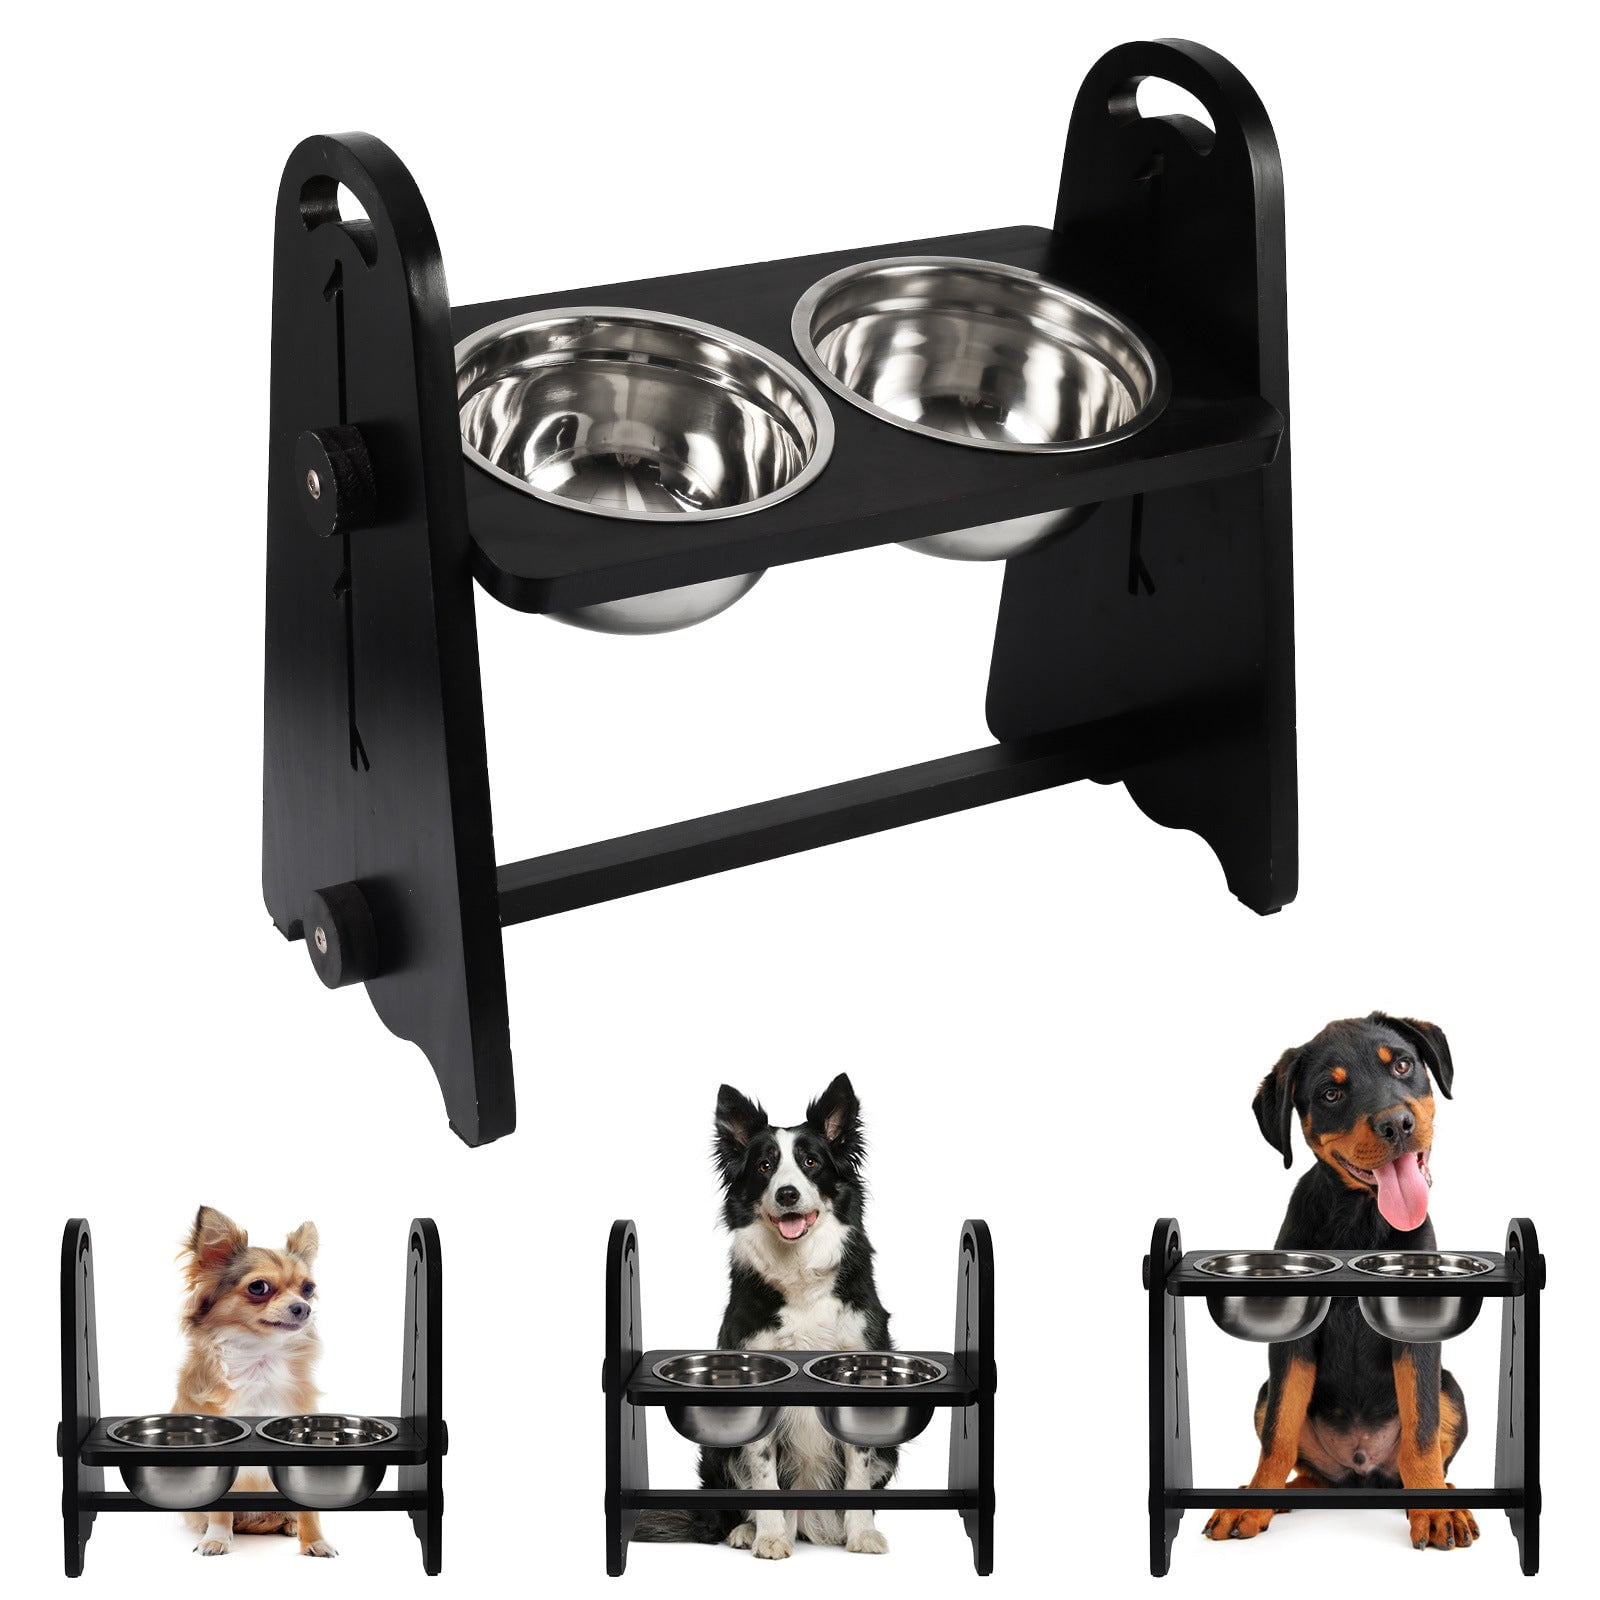 Dropship Dog Raised Bowls With 6 Adjustable Heights Stainless Steel  Elevated Dog Bowls Foldable Double Bowl Dog Feeder For Small Medium Large  Size Dog to Sell Online at a Lower Price